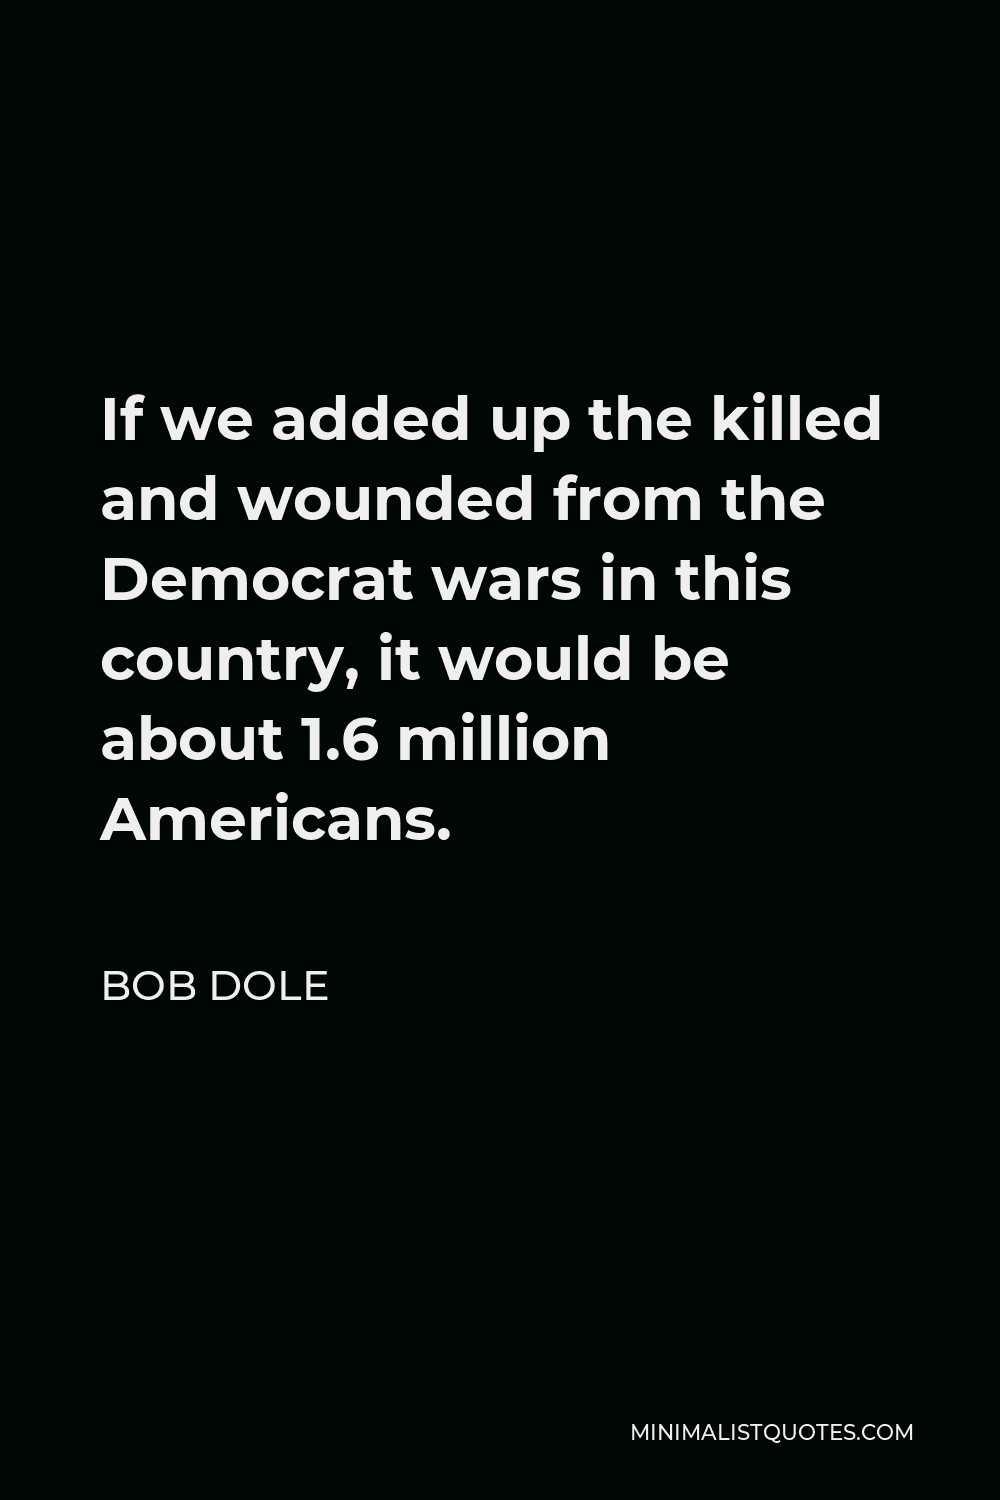 Bob Dole Quote - If we added up the killed and wounded from the Democrat wars in this country, it would be about 1.6 million Americans.